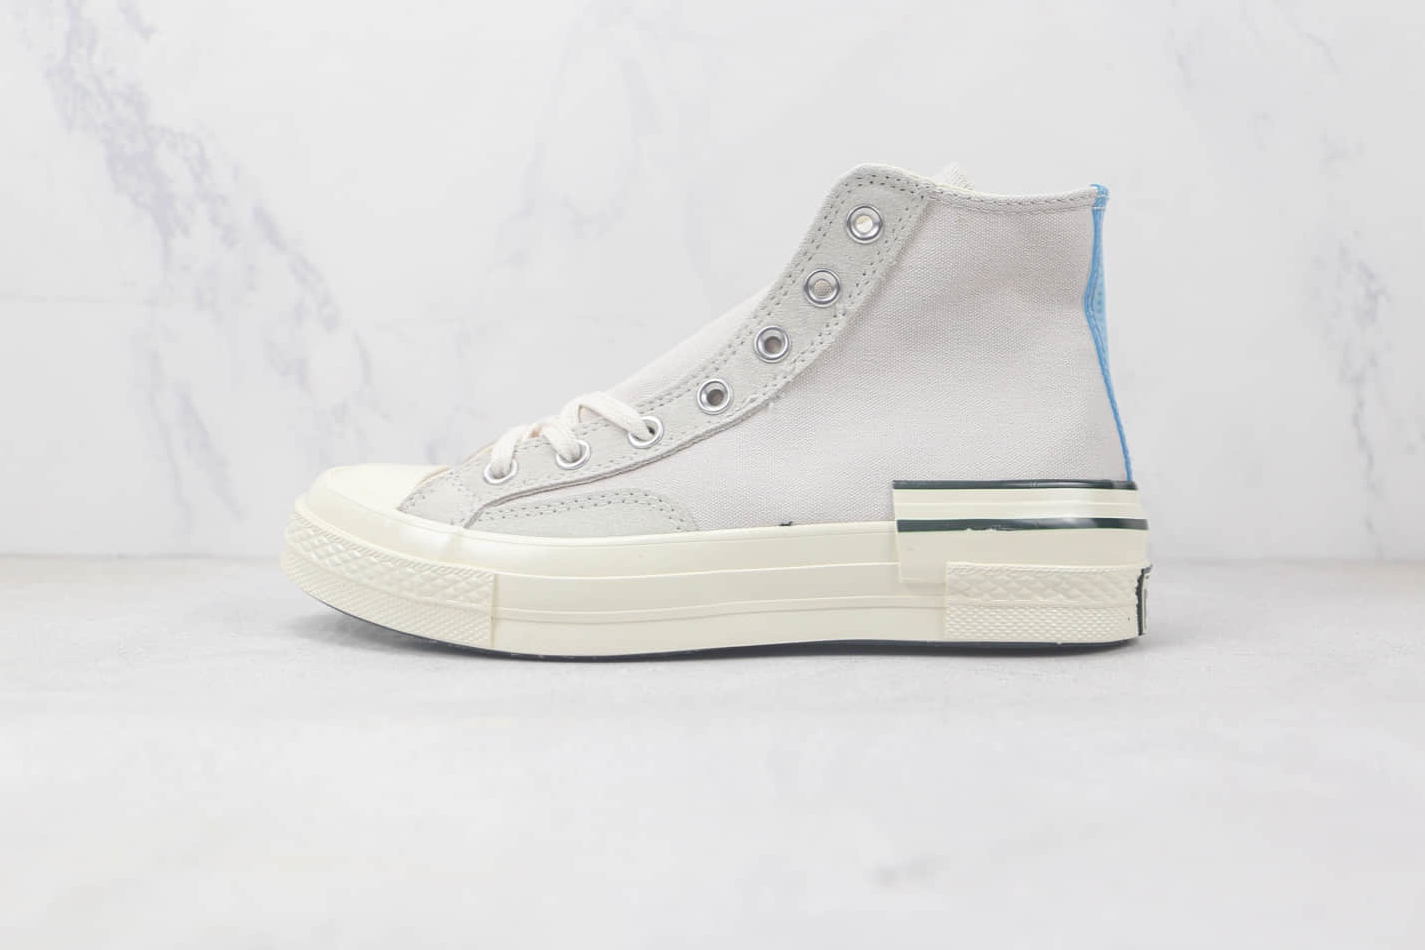 Converse Chuck 70 High 'Grey Ivory Blue' A04286C - Stylish and Classic Footwear